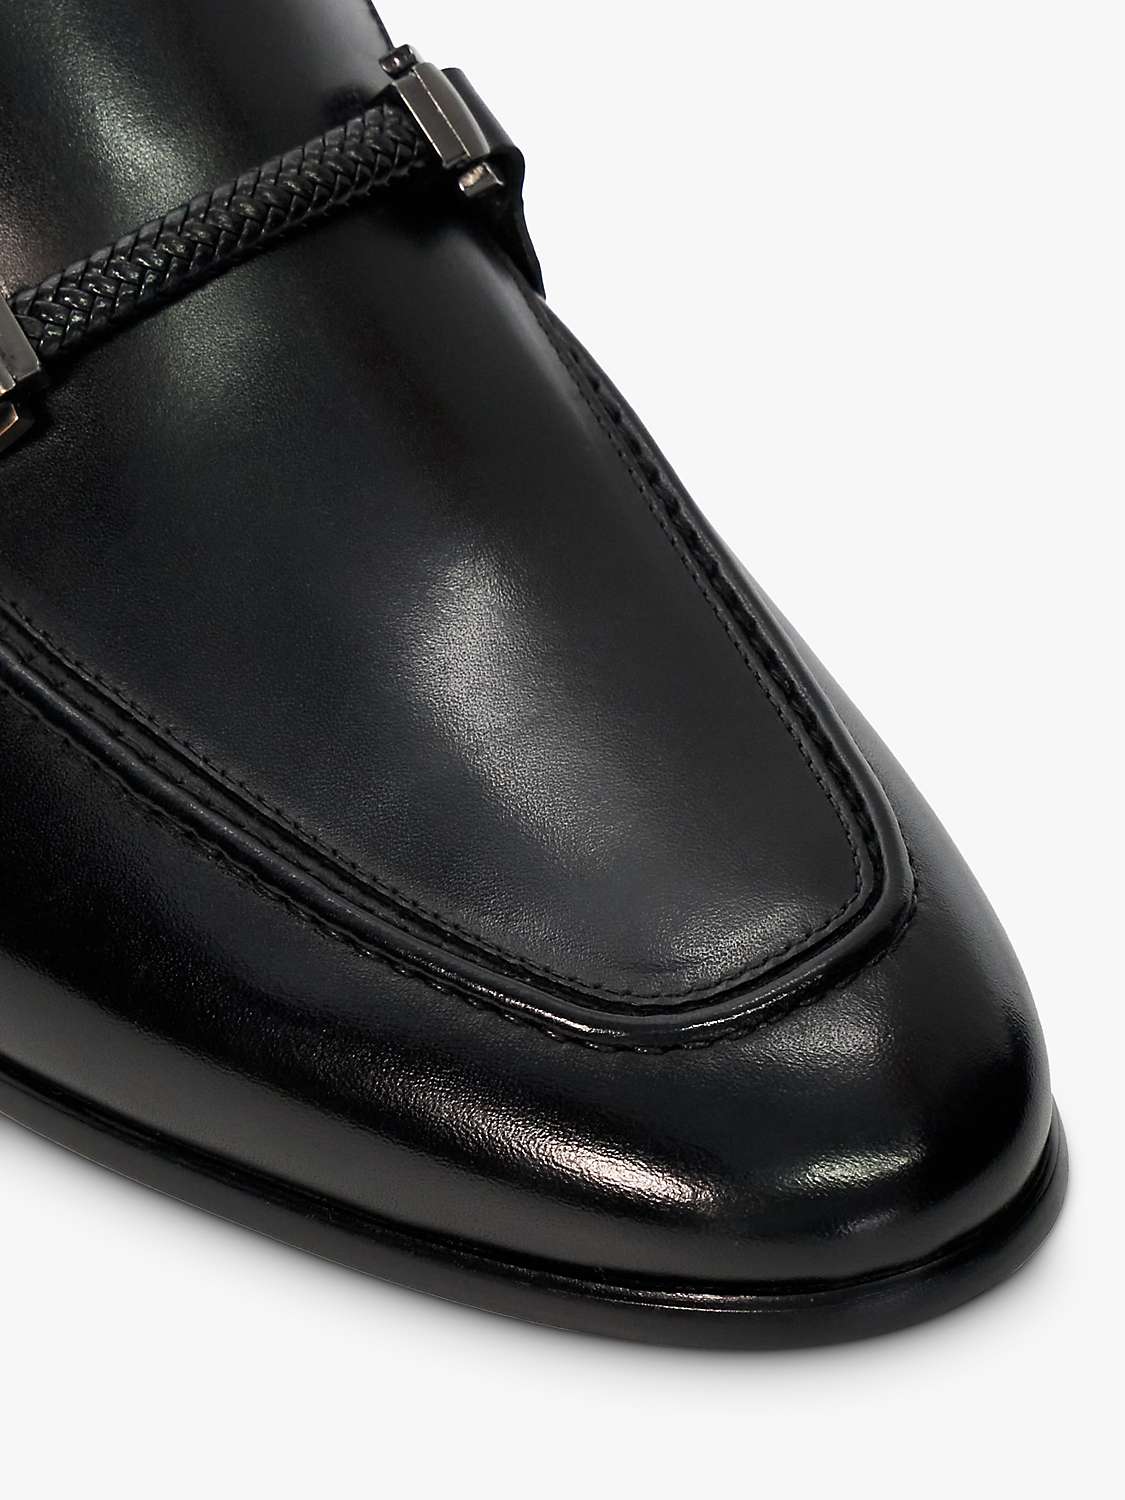 Buy Dune Scilly Leather Loafers, Black Online at johnlewis.com